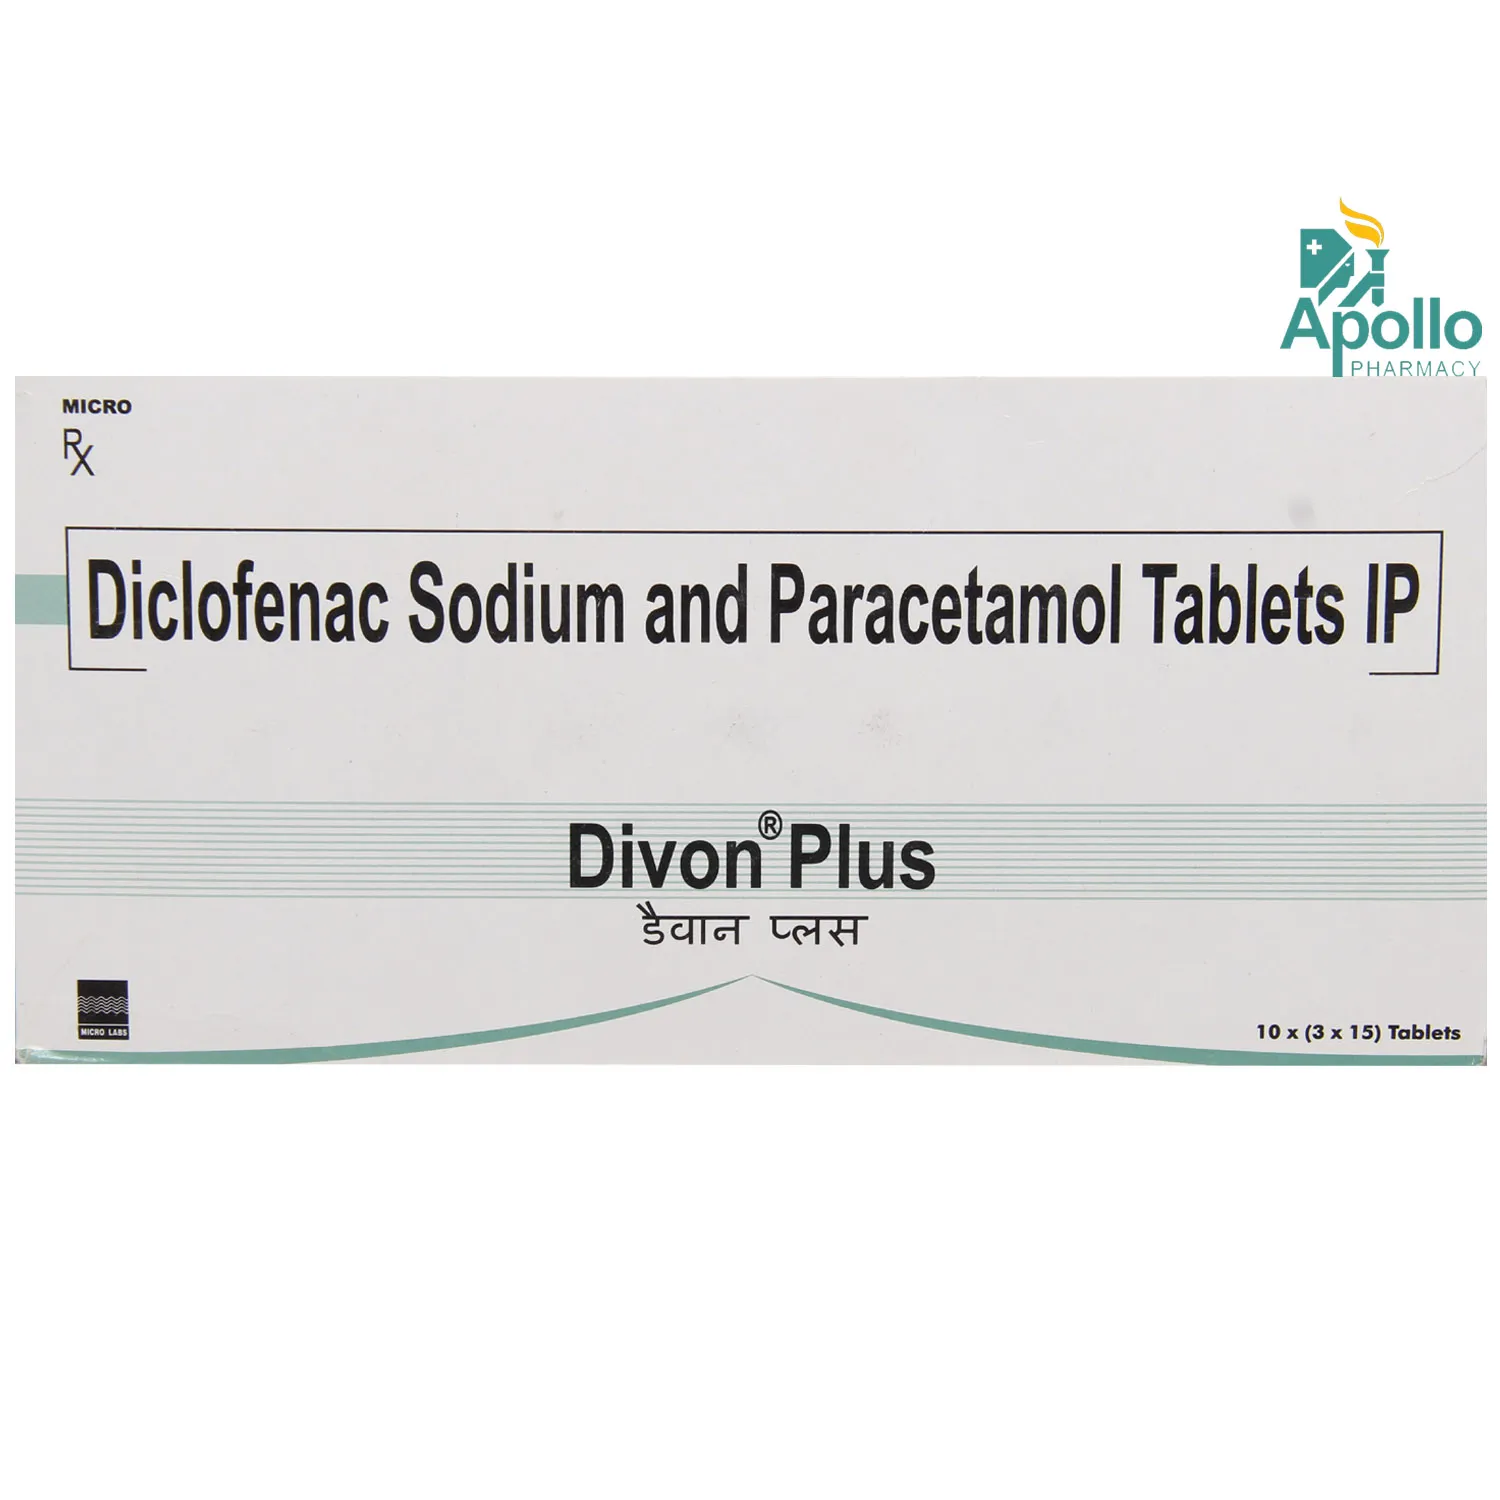 Oxalgin-DP Tablet 10's Price, Uses, Side Effects, Composition